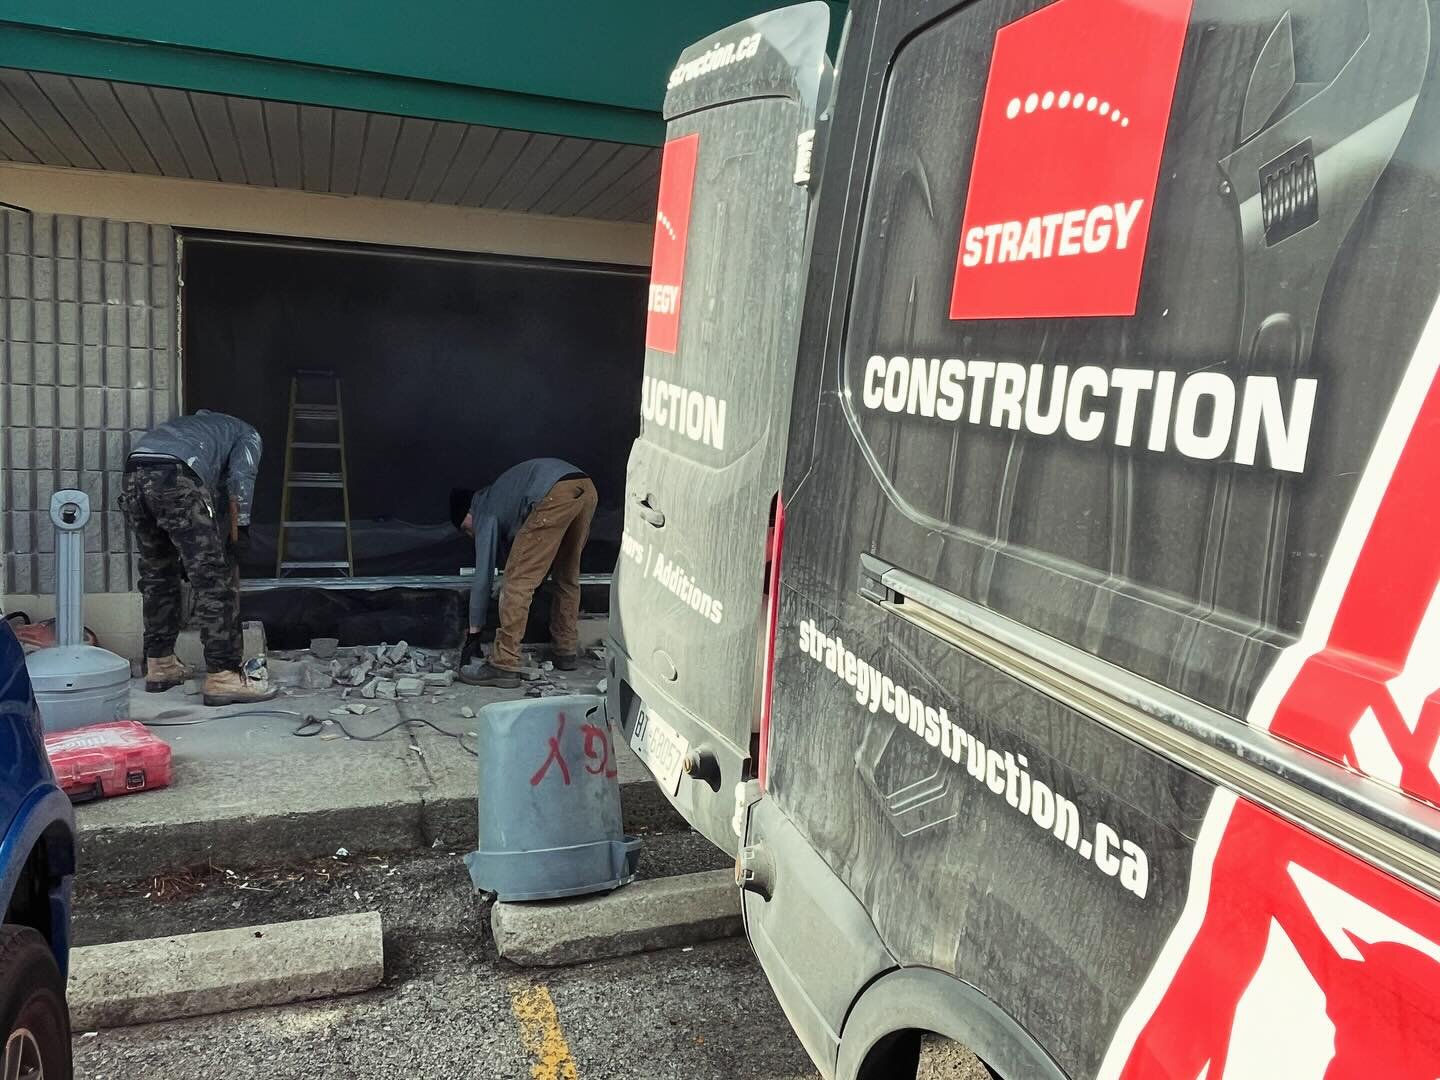 Yes we do Commerical work!!!
Just another commercial door system being installed. 

#strategyconst #hamontcontractor #houserenovation #houserenovations #framing  #housereno #restoration
#bathroomrenovation #burlingtoncontractor #remodel 
#hamiltoncon